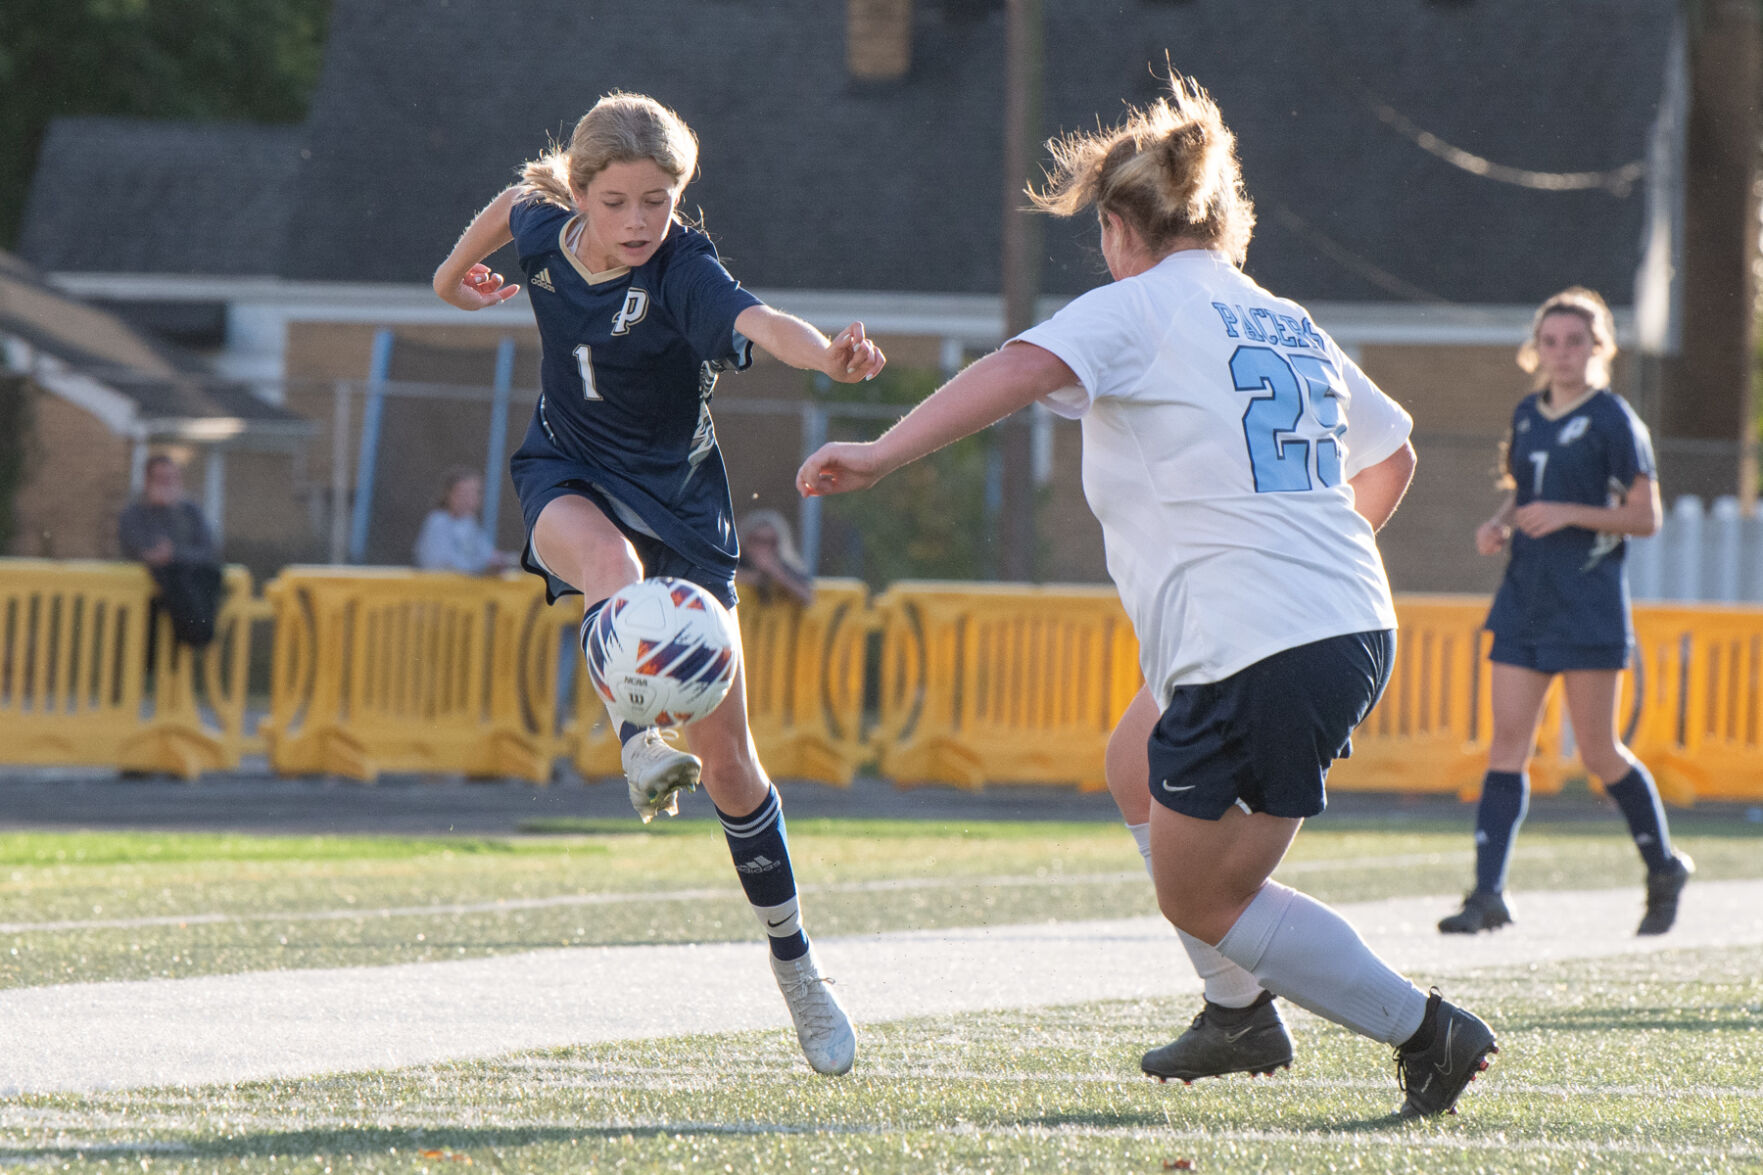 Top Contenders Revealed: NTSPY Girls’ Soccer Player of the Year Finalists Announced